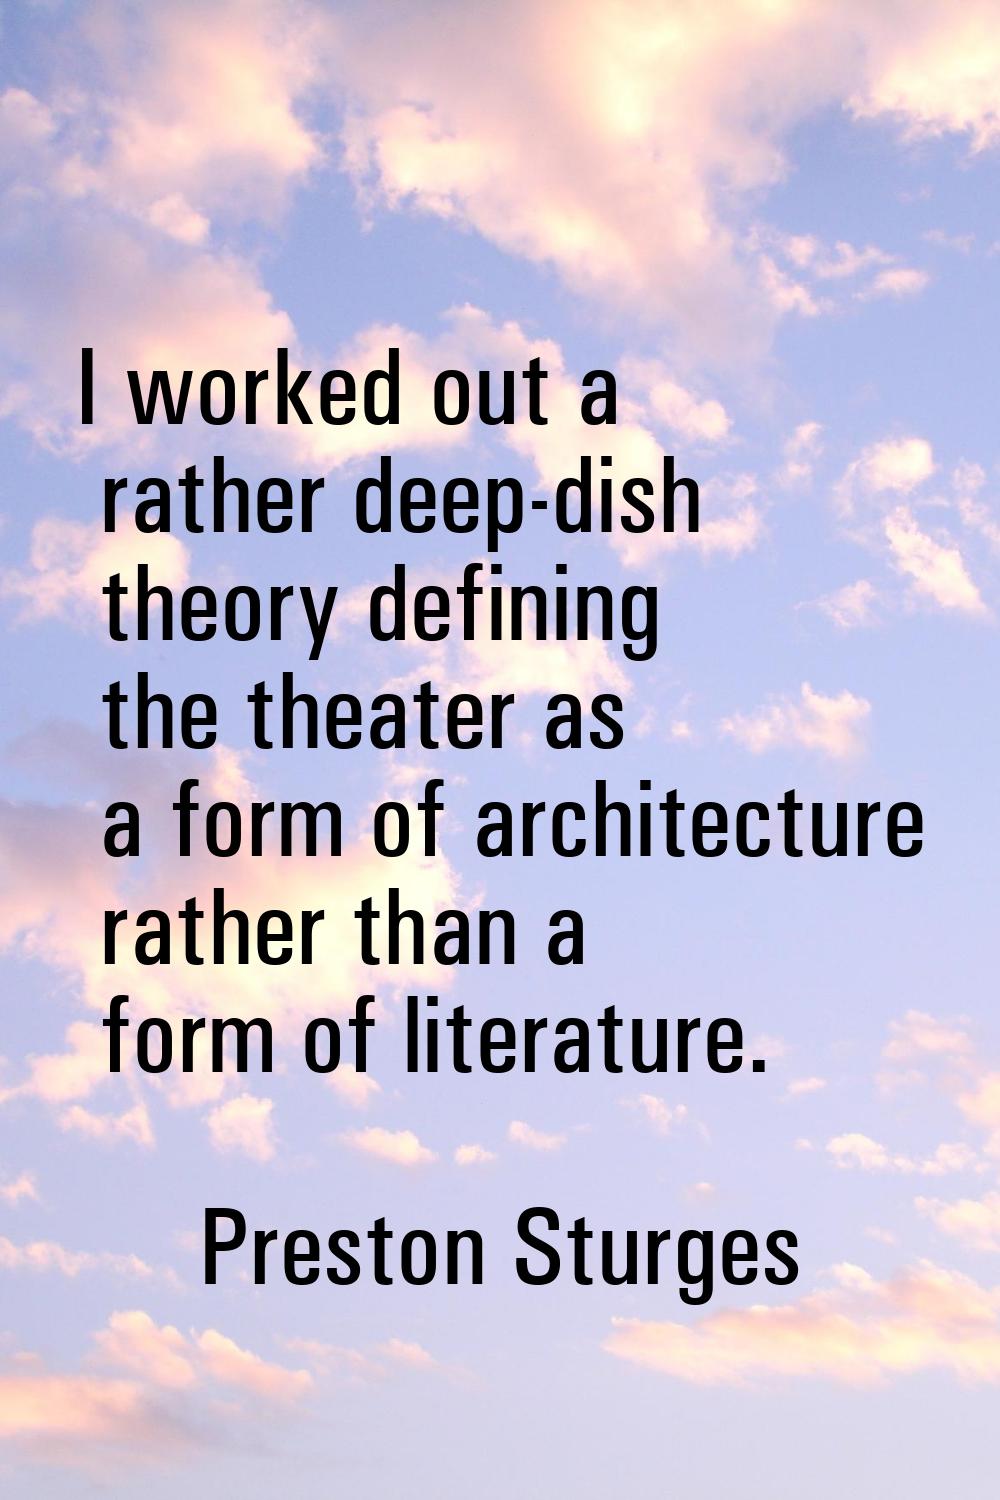 I worked out a rather deep-dish theory defining the theater as a form of architecture rather than a